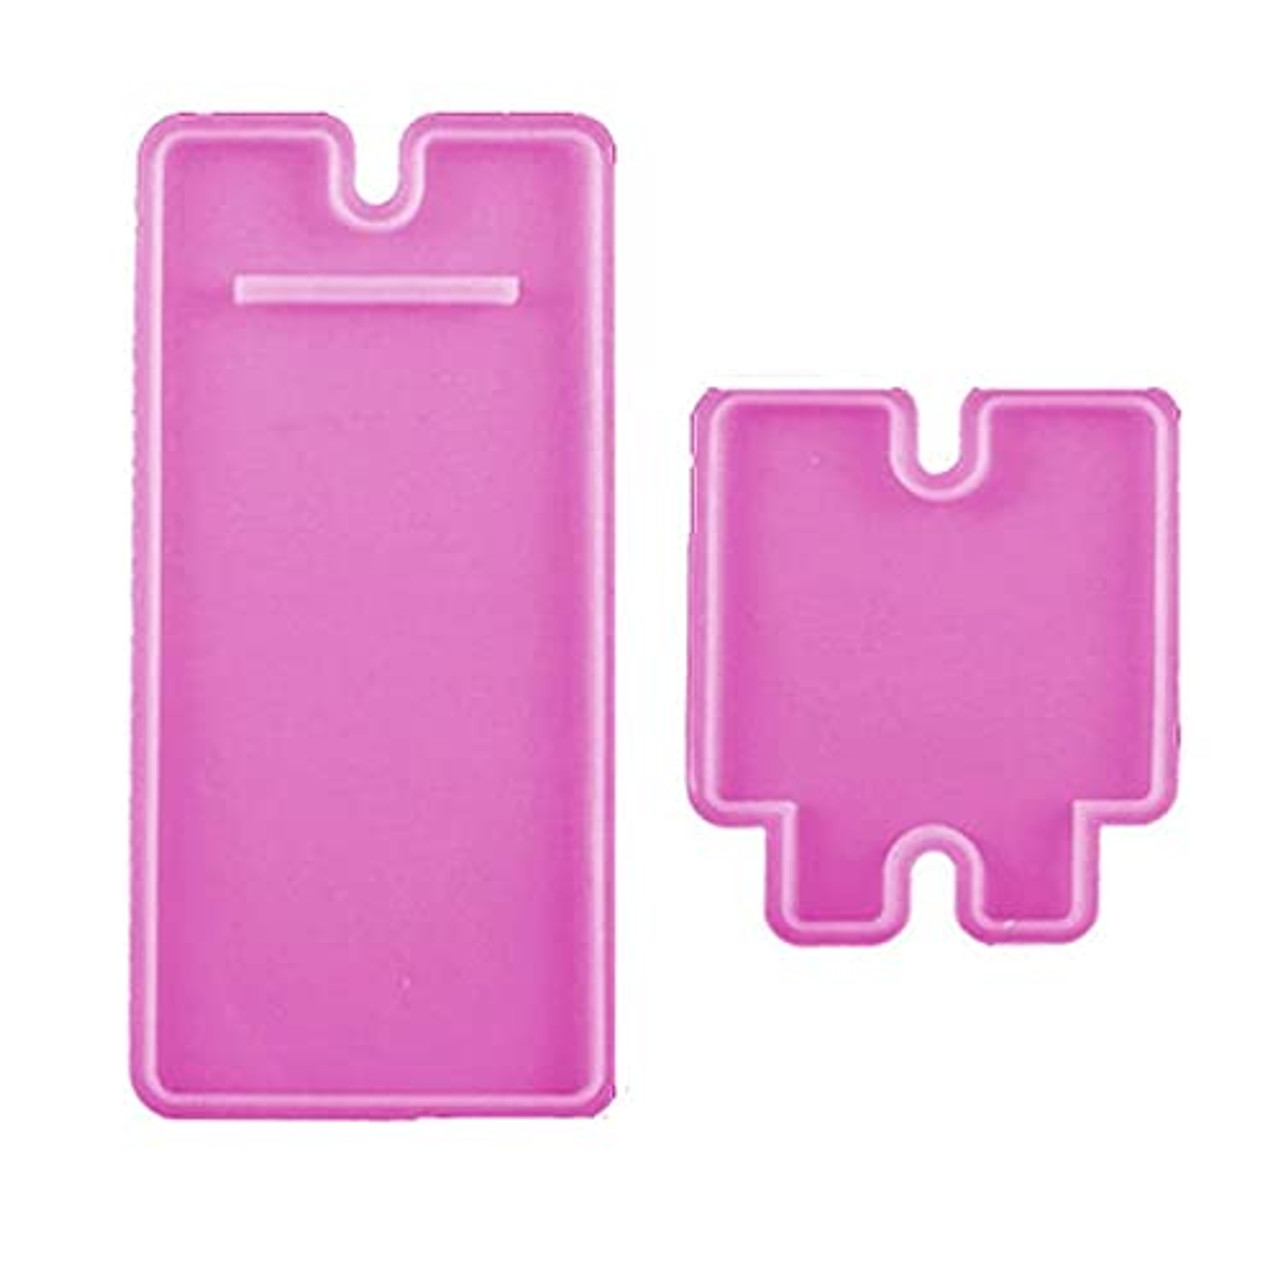 Silicone Mobile Phone Stand Holder Casting Mold Resin Epoxy Mould Craft Tools 